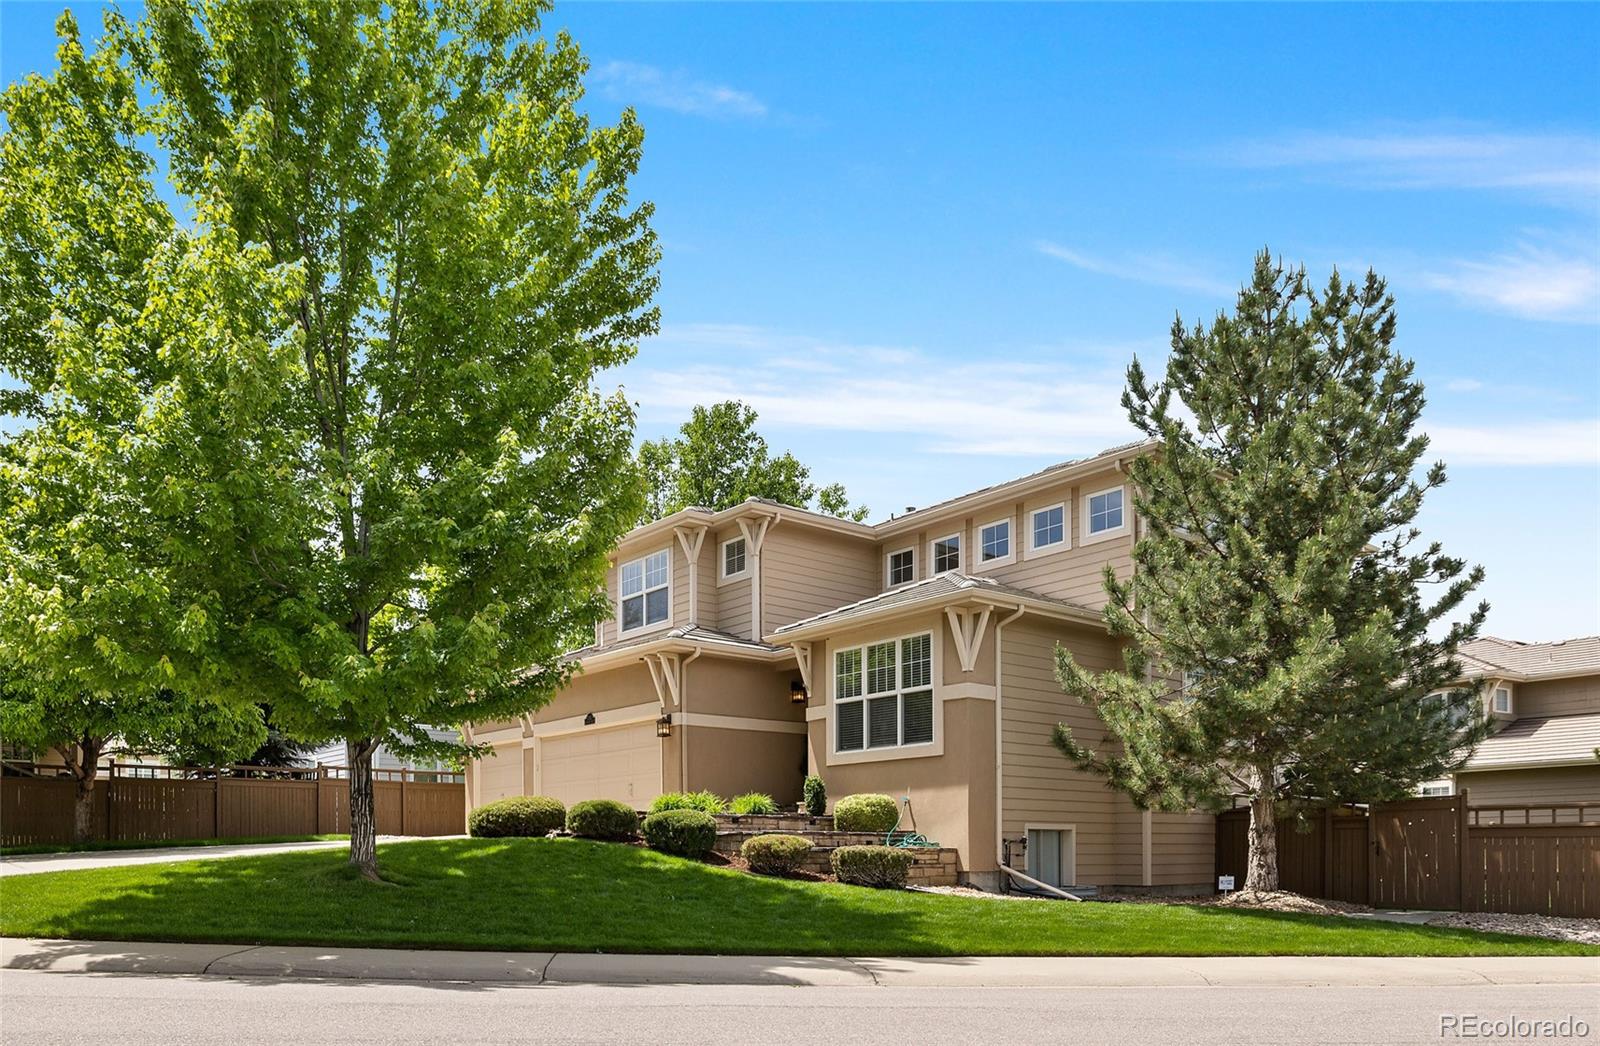 2752  rockbridge circle, Highlands Ranch sold home. Closed on 2023-10-12 for $900,000.